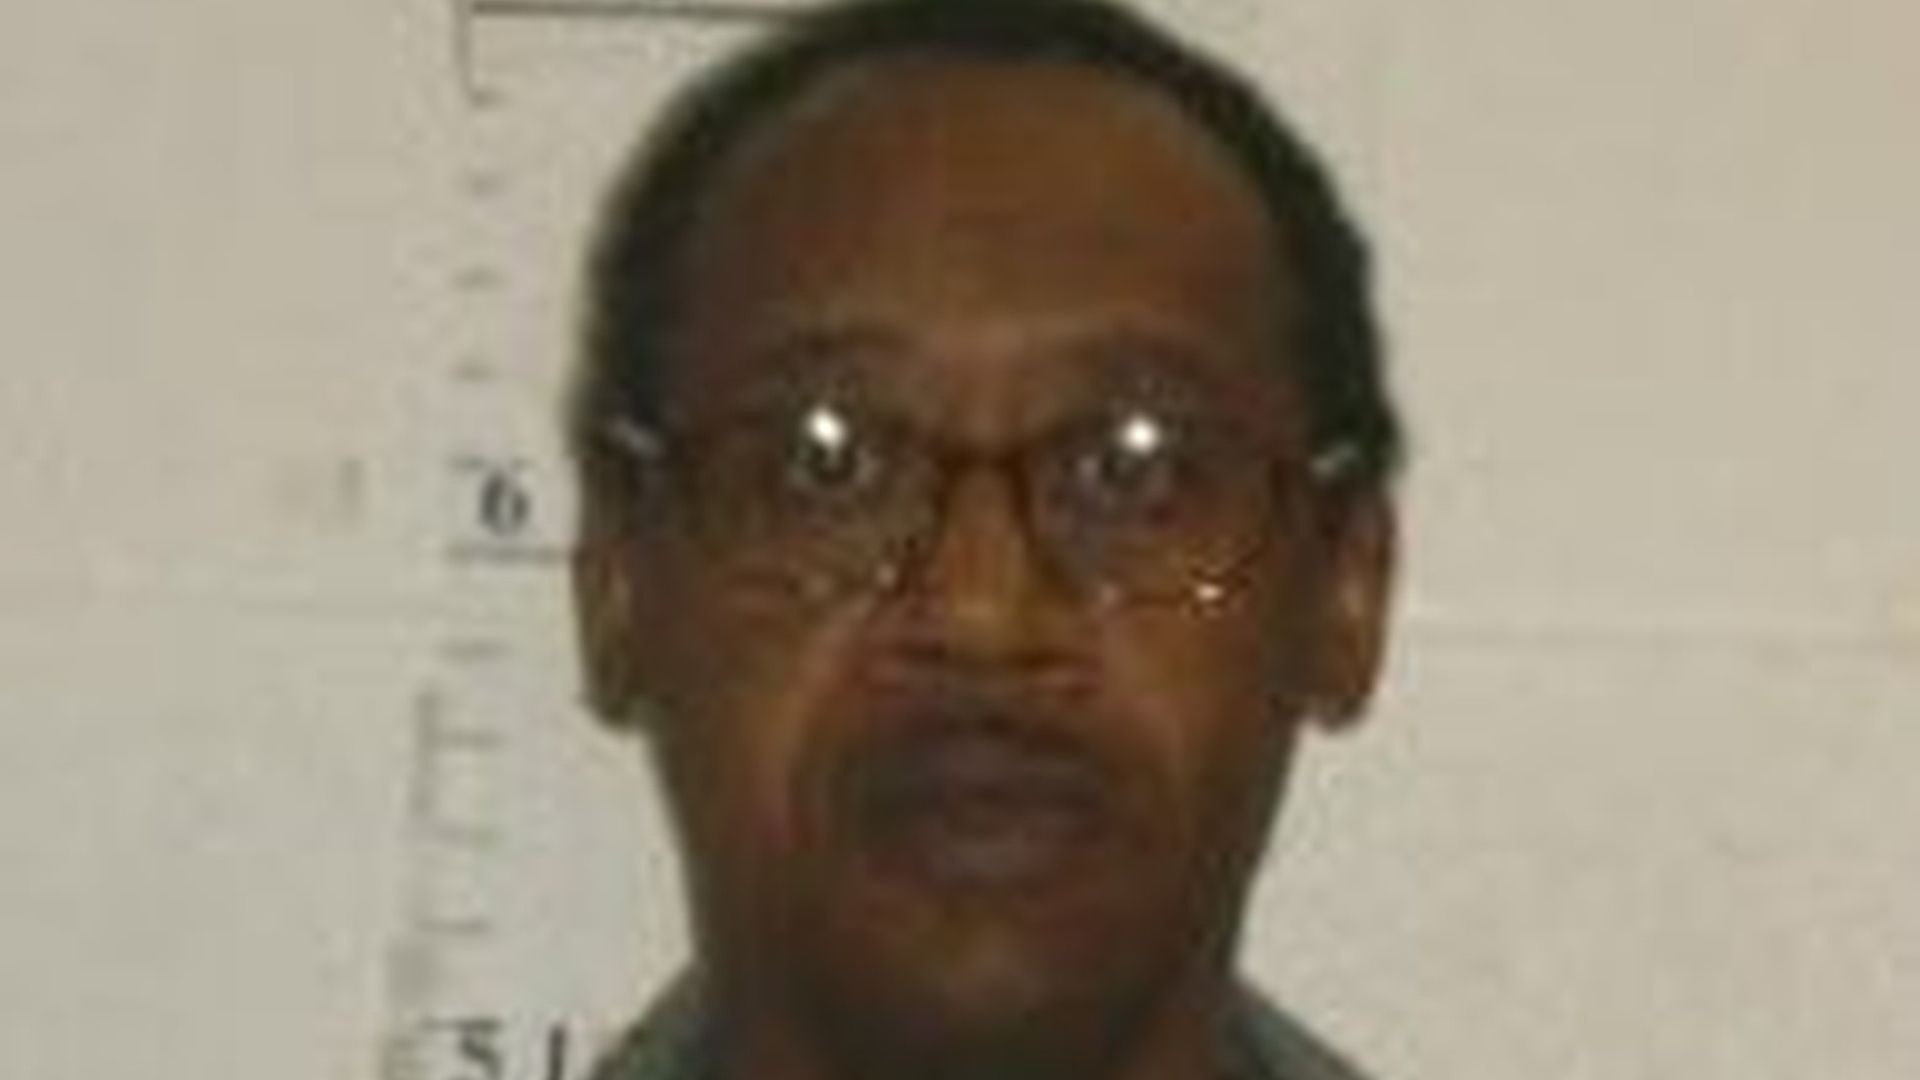 Ernest Johnson, who was executed in Missouri despite his intellectual difficulties